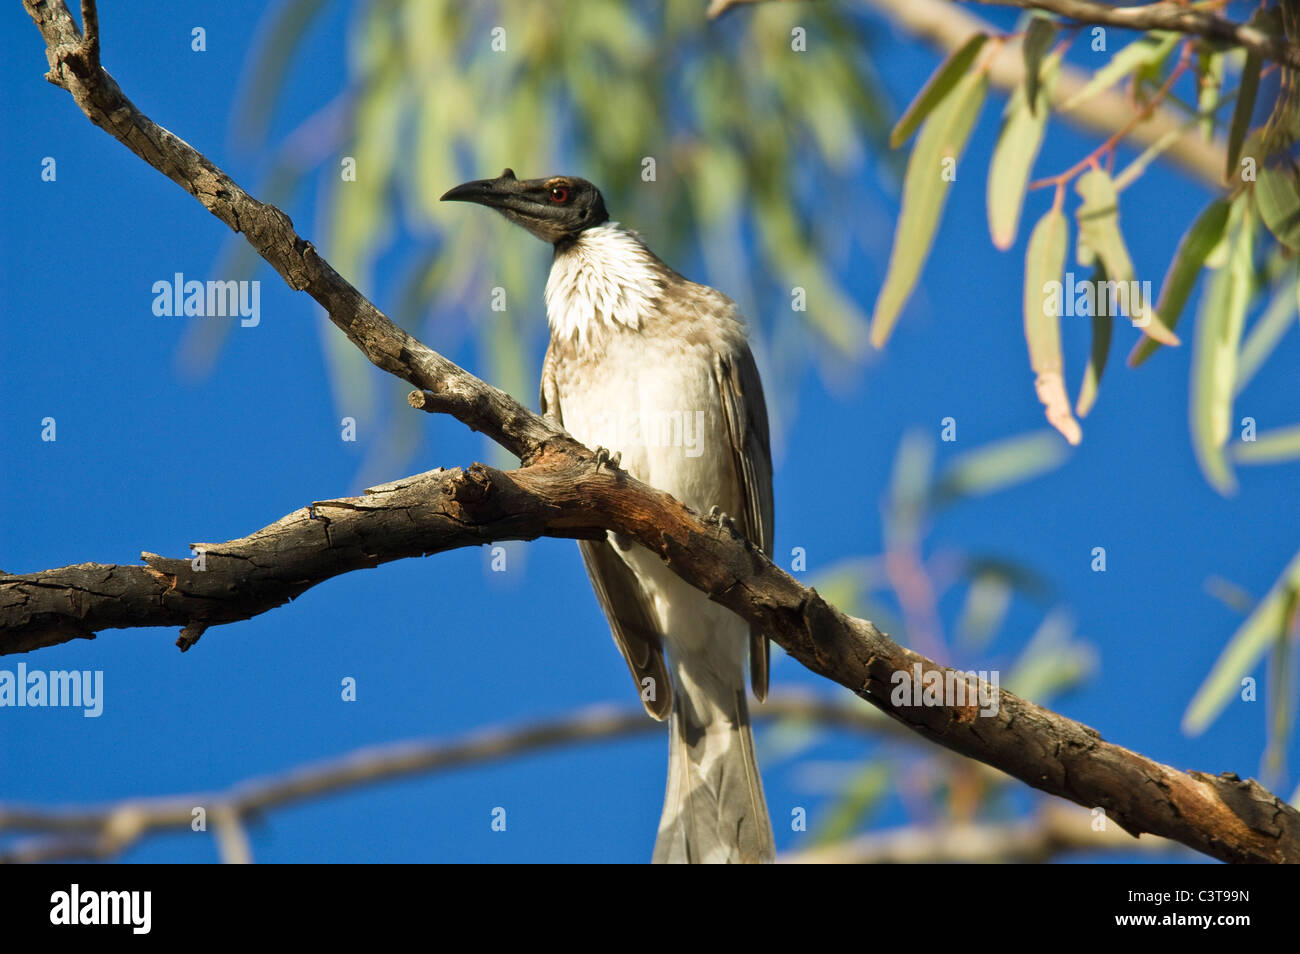 Noisy Friarbird, Ourimpere Waterhole, Currawinya National Park, Queensland, Australia Stock Photo